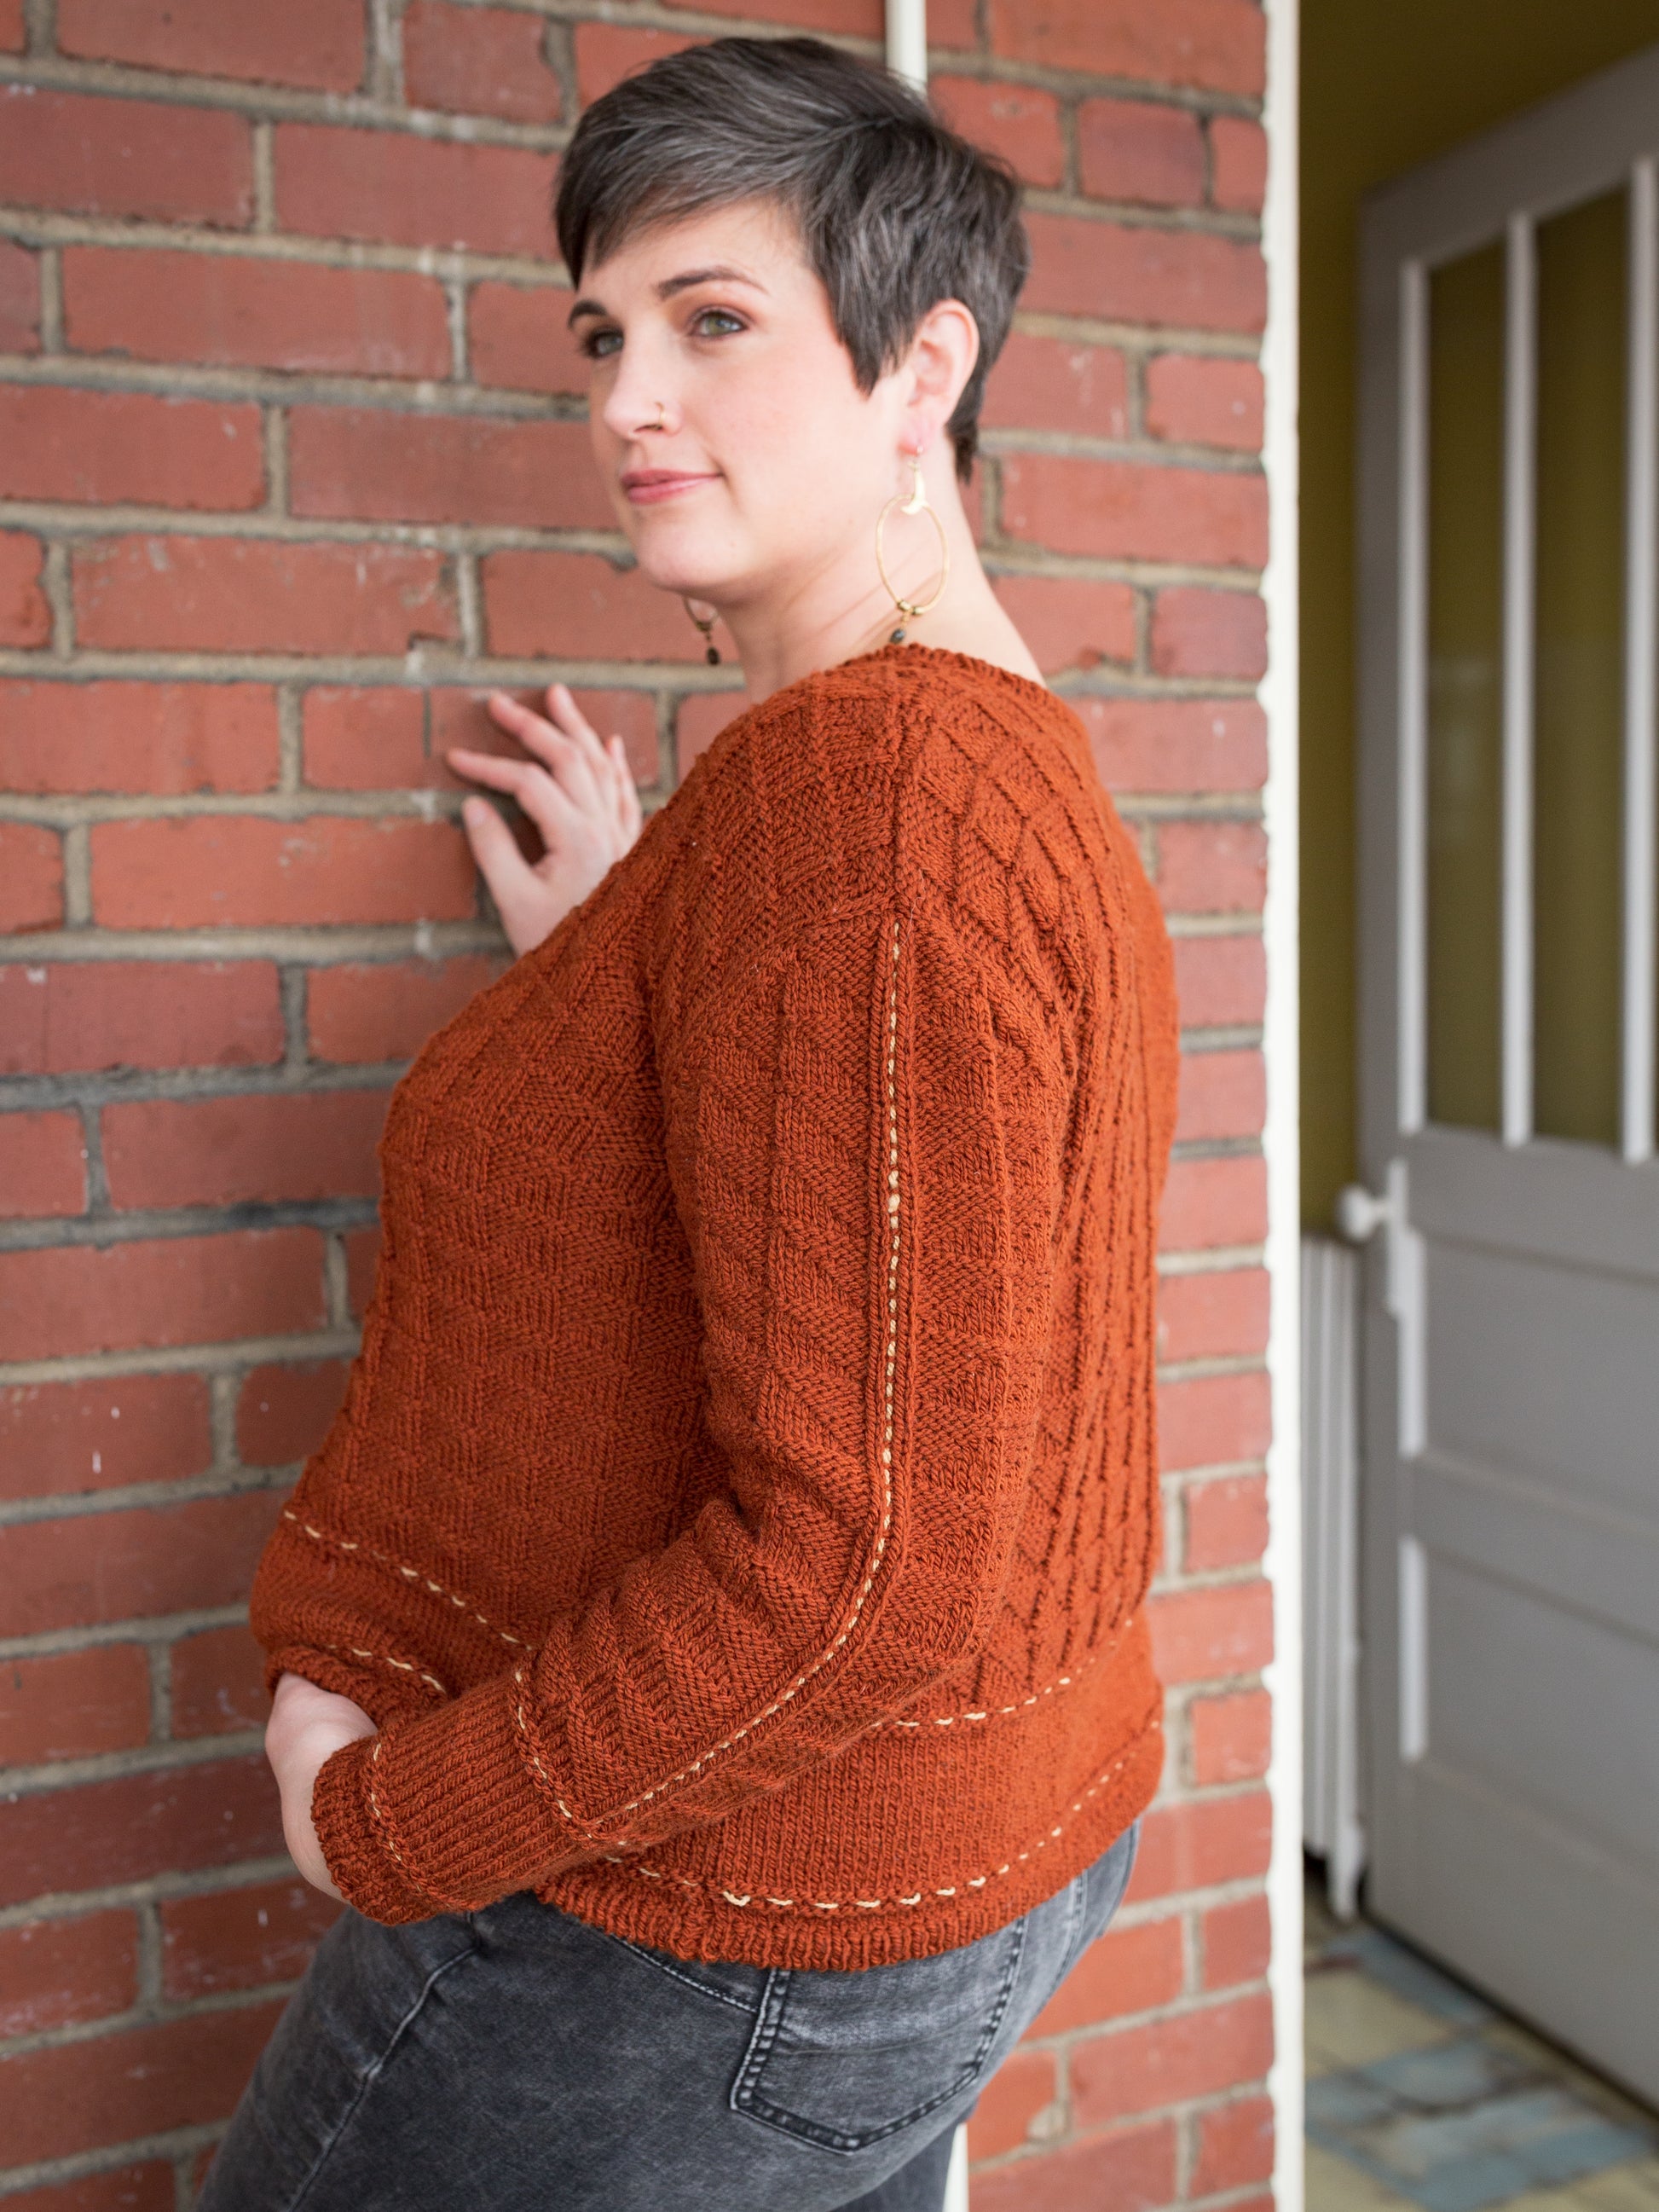 Seen from behind at a 3/4 angle, Jen wears a brick orange sweater, knit with an allover texture and featuring a contrasting running stitch on the arm and hem, with a pair of grey jeans. 